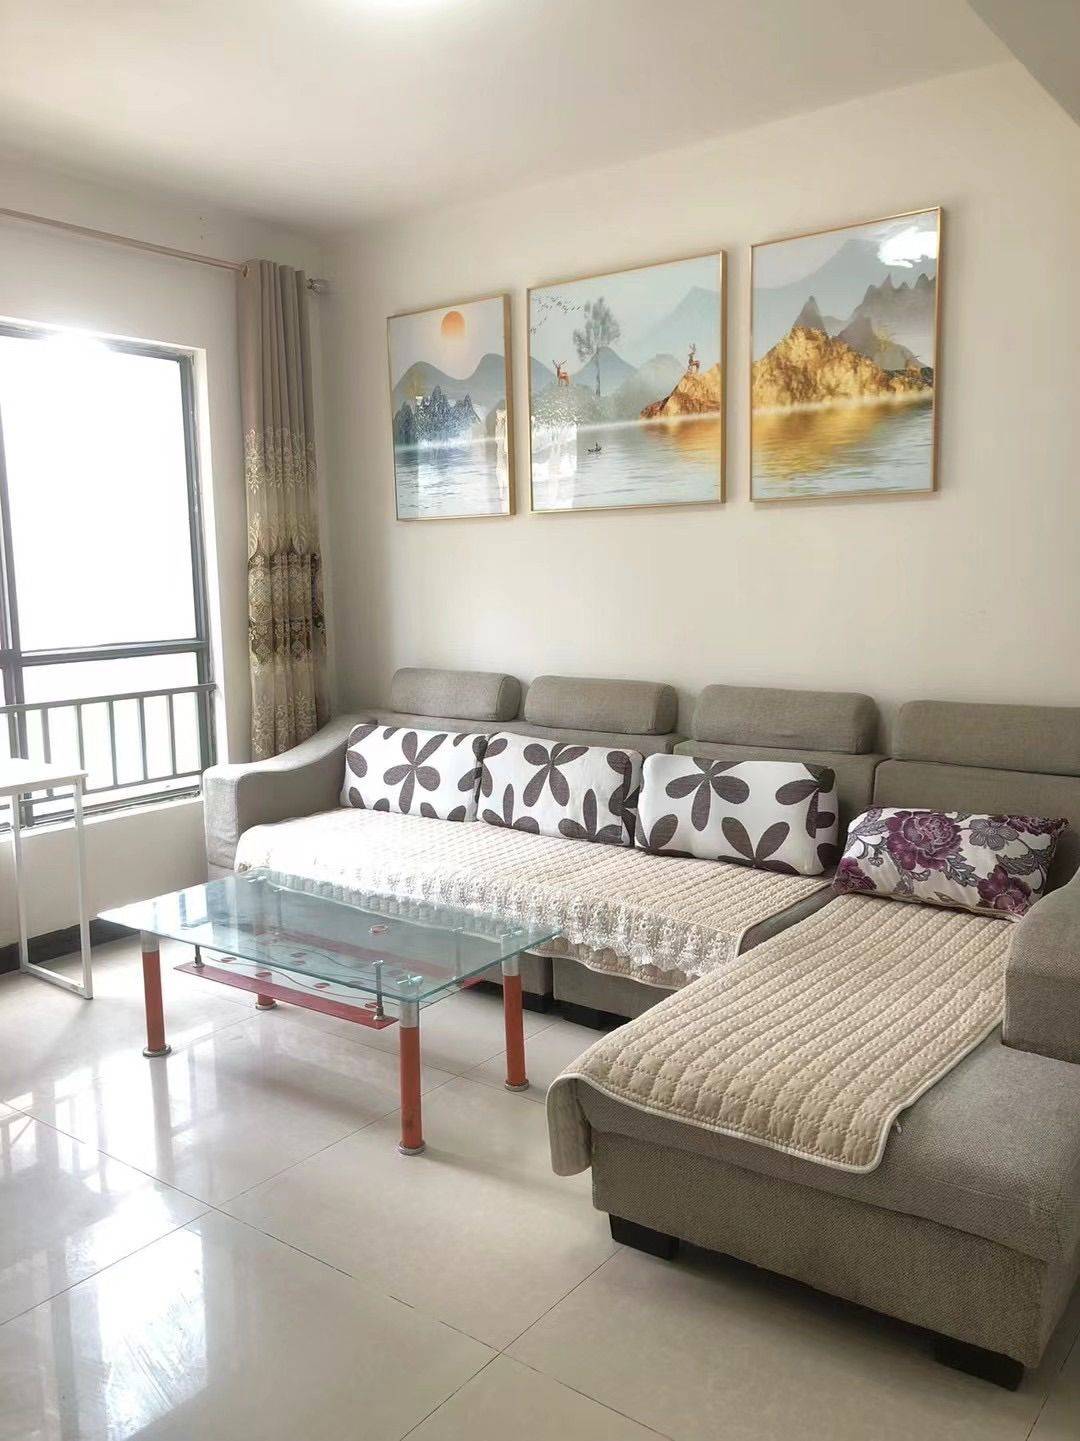 Kunming-Chenggong-Cozy Home,Clean&Comfy,“Friends”,Chilled,LGBTQ Friendly,Pet Friendly